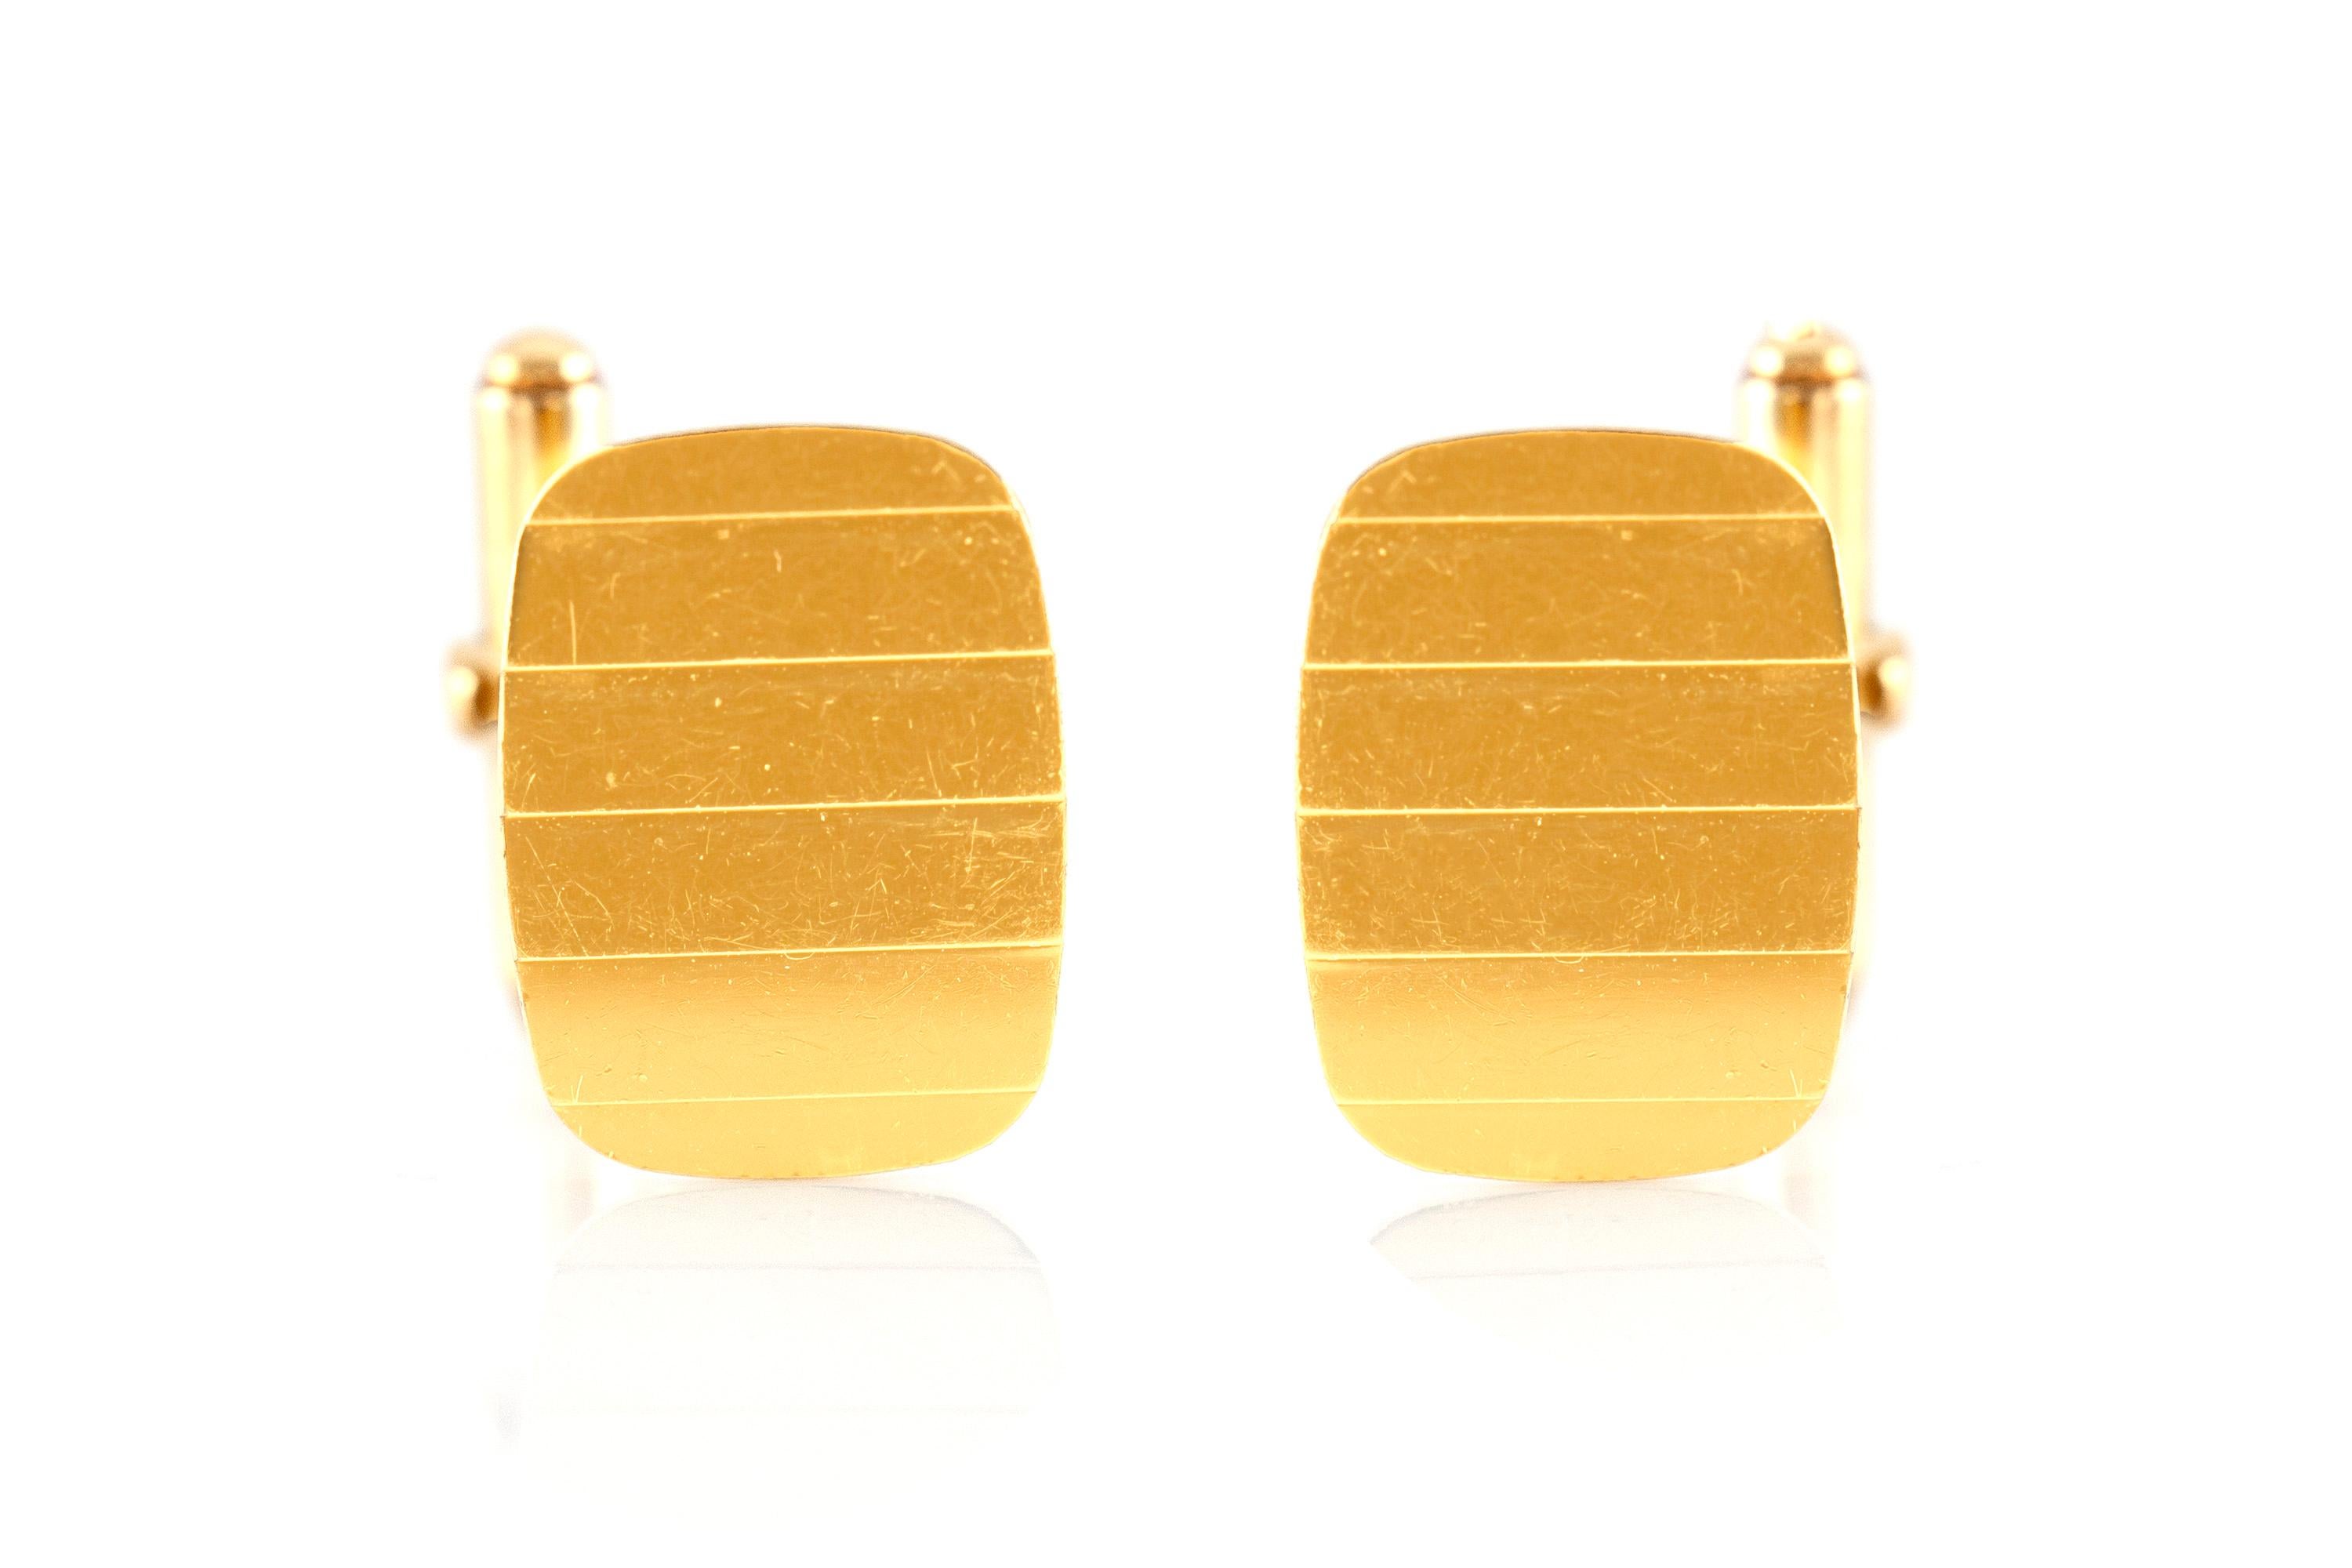 Cufflinks finely crafted in 18k yellow gold weighing a total of 3.6 dwt., size of each cufflink is 0.75 inch. Circa 1990.